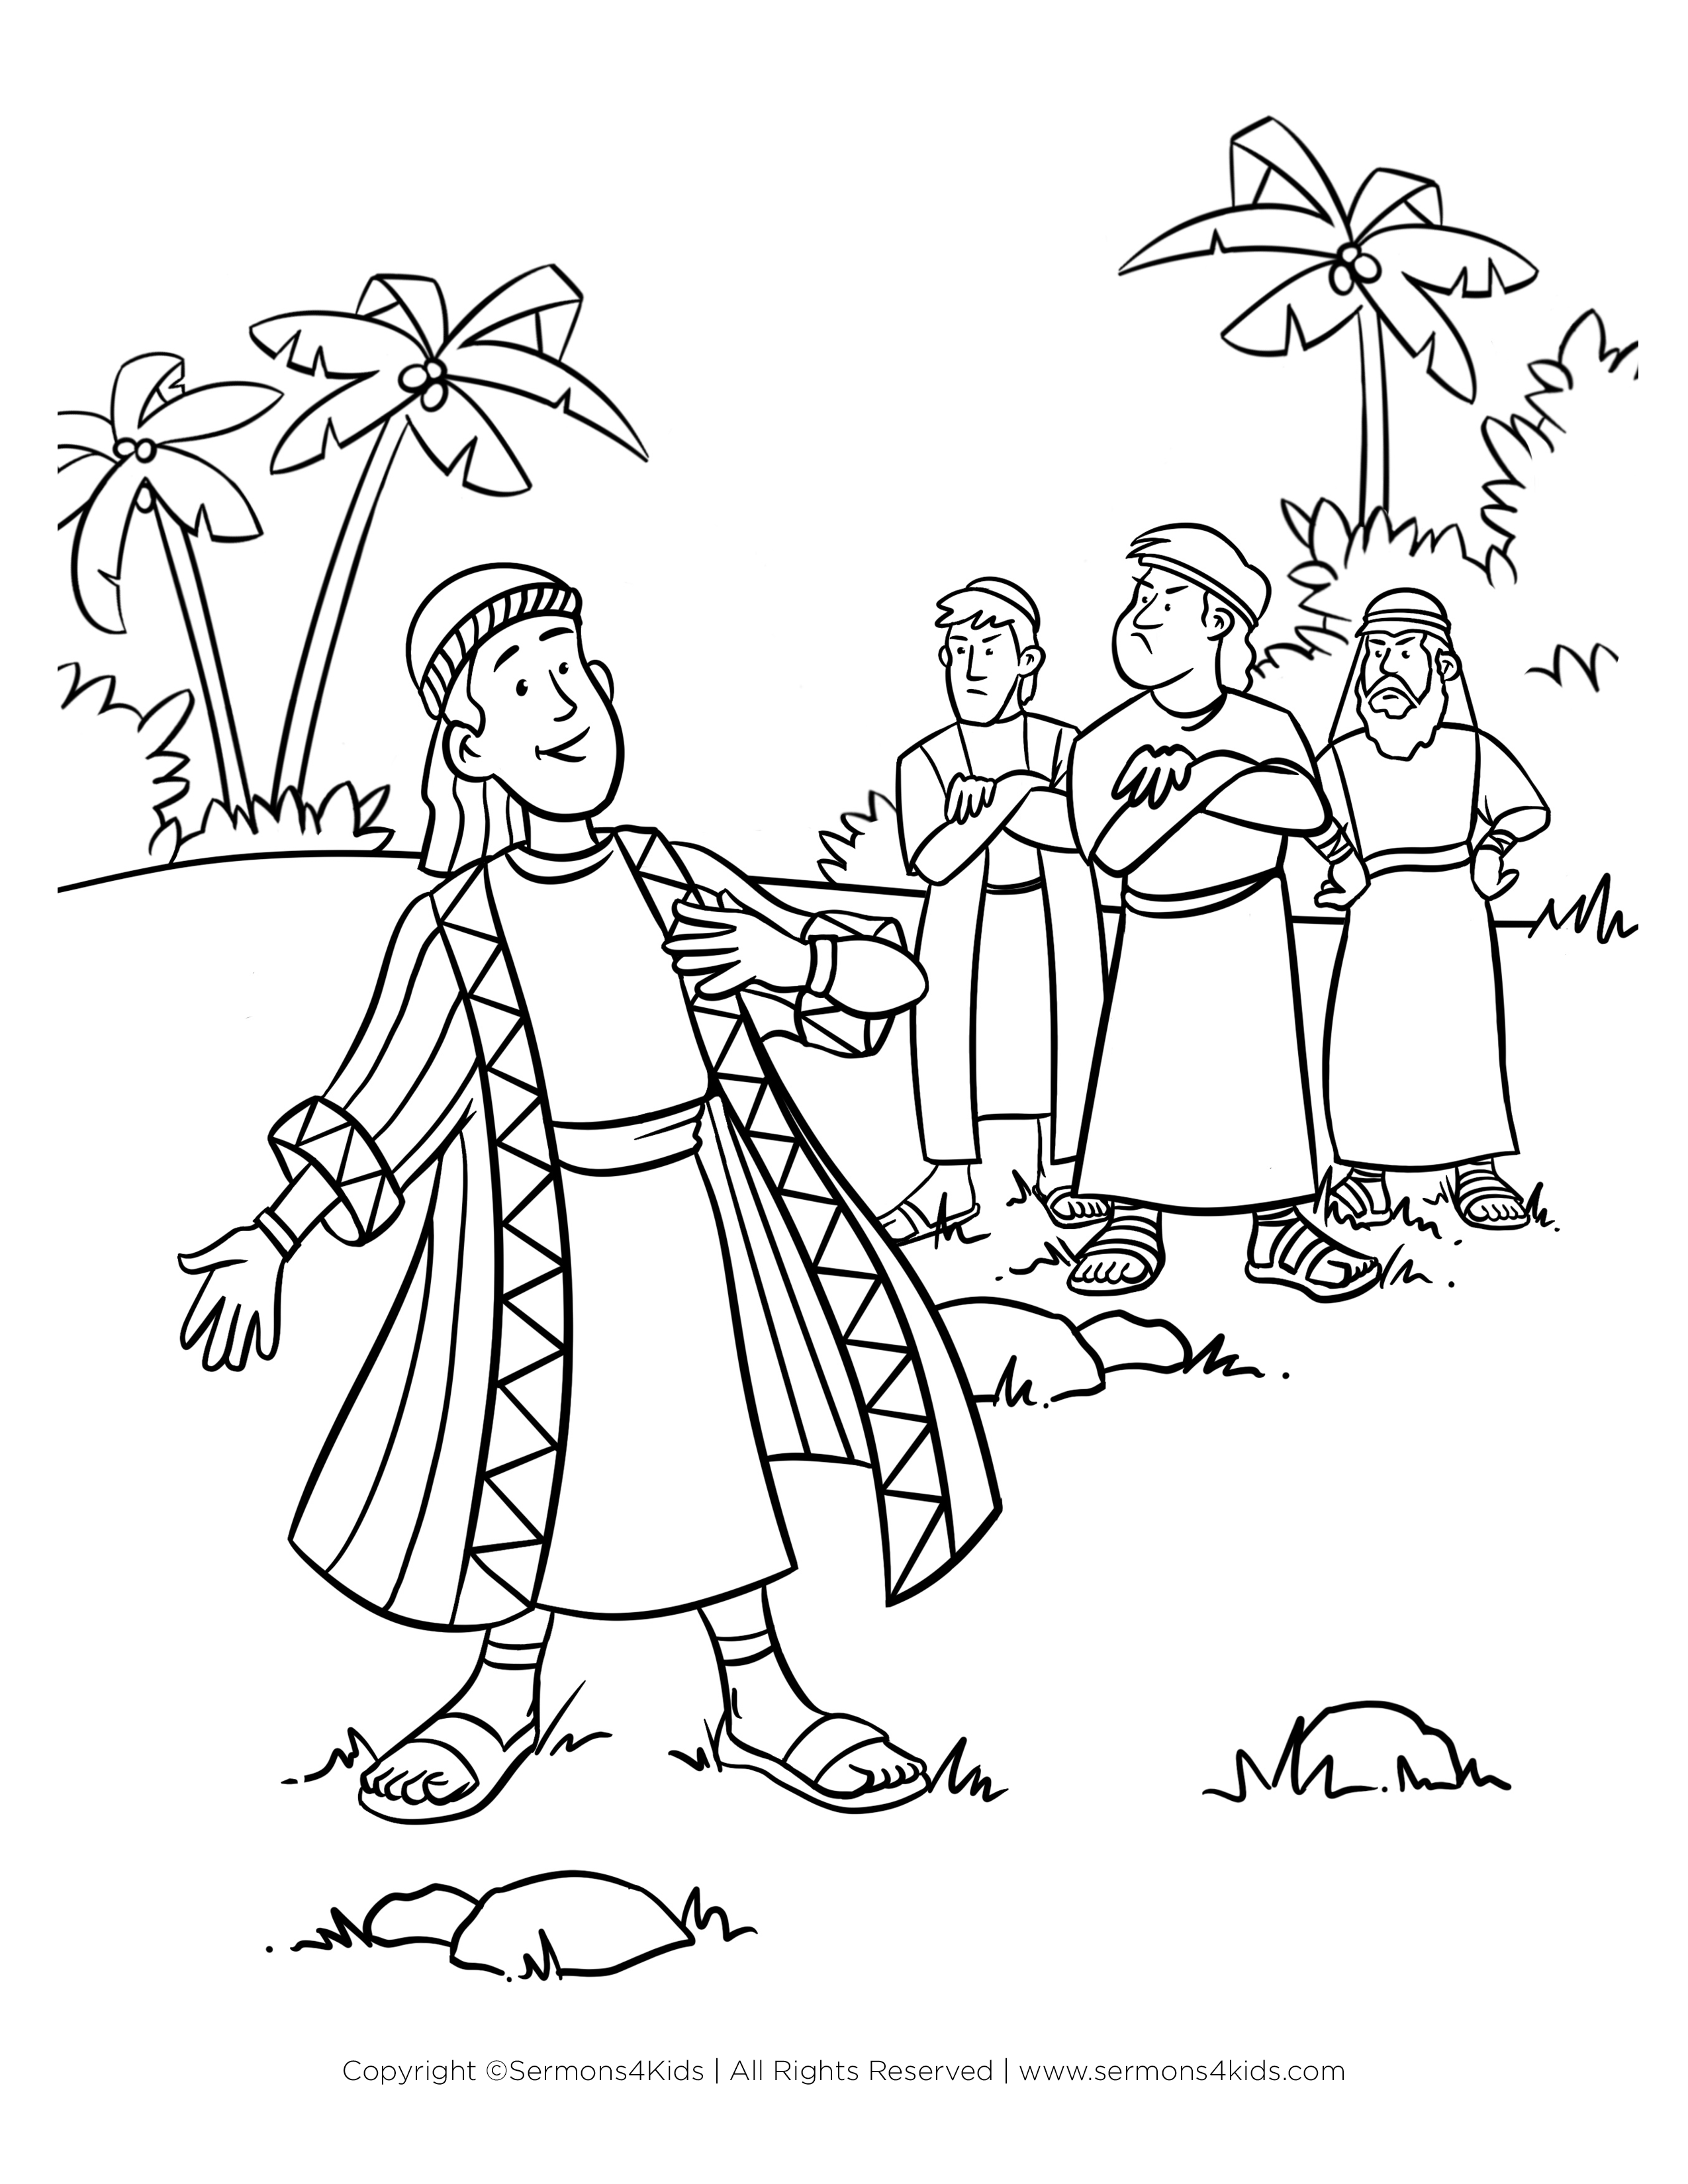 Joseph and his coat childrens sermons from sermo